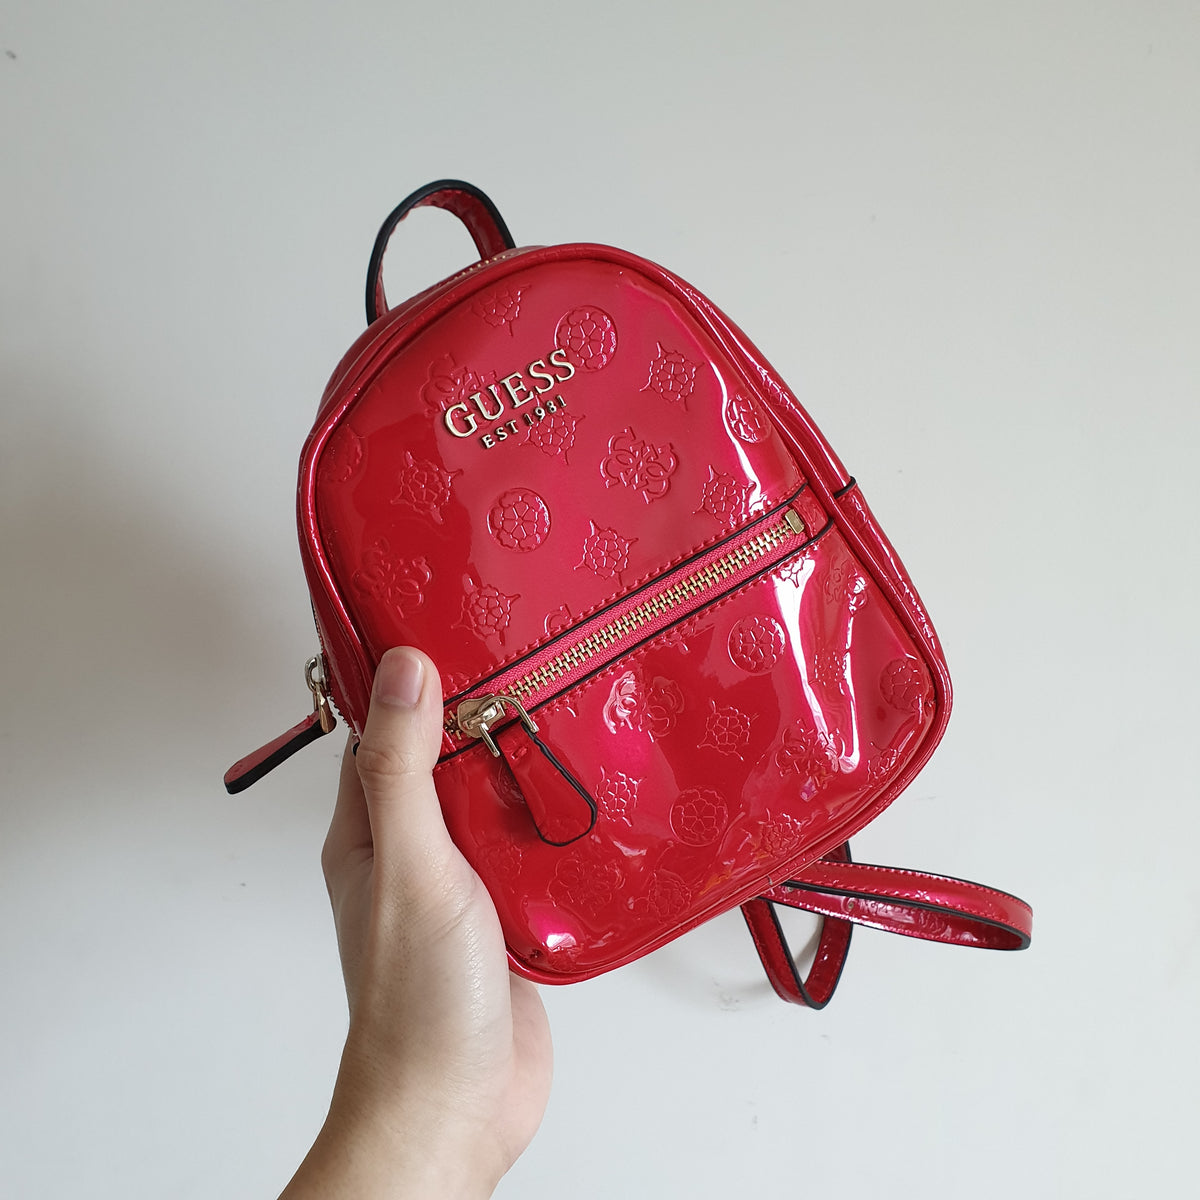 guess backpack philippines price